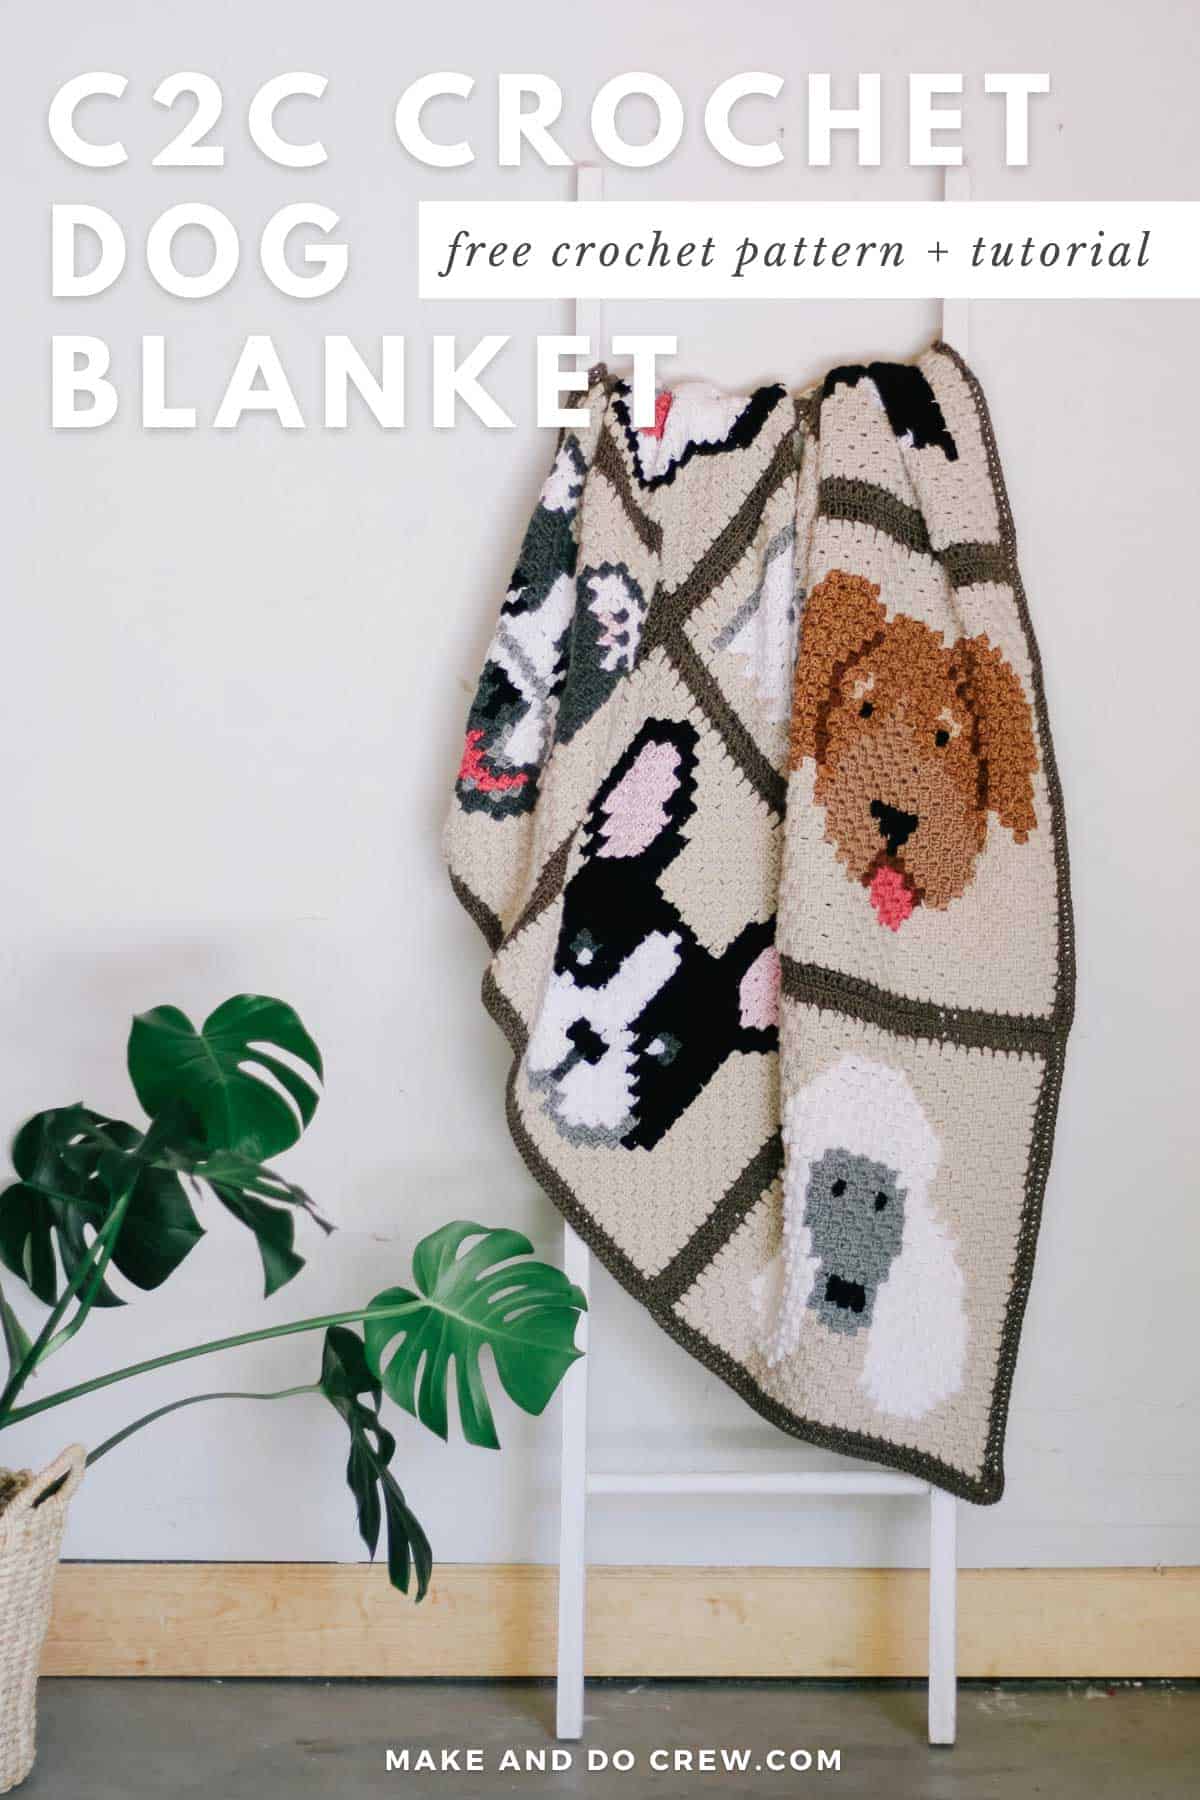 This image shows a free crochet pattern for a corner to corner crochet dog blanket.